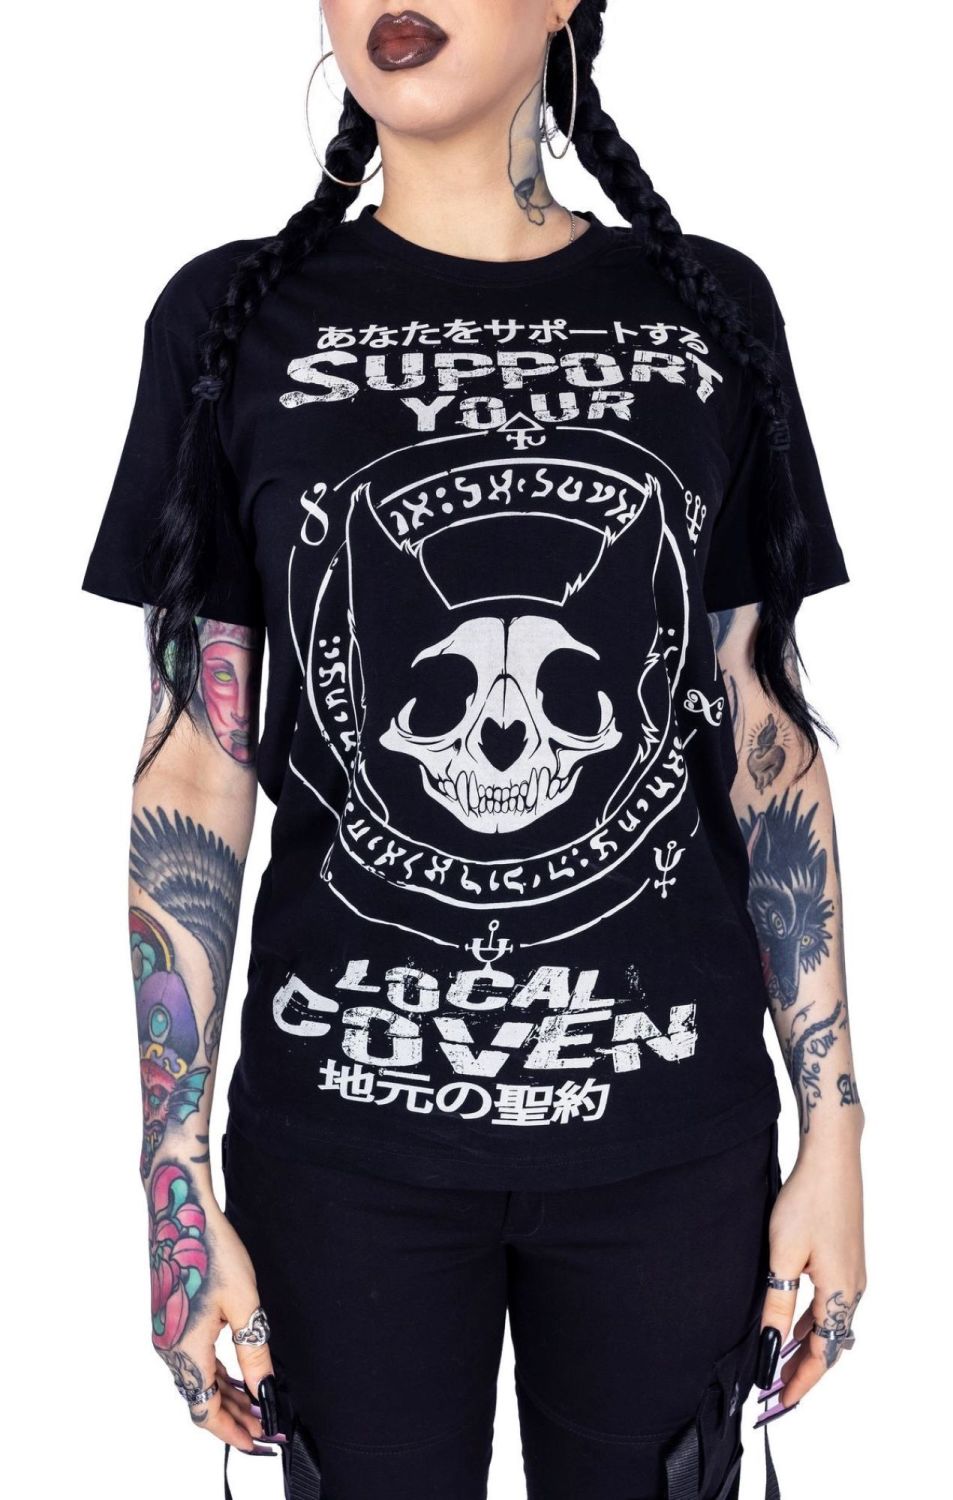 Support your coven T-shirt RRP £19.99